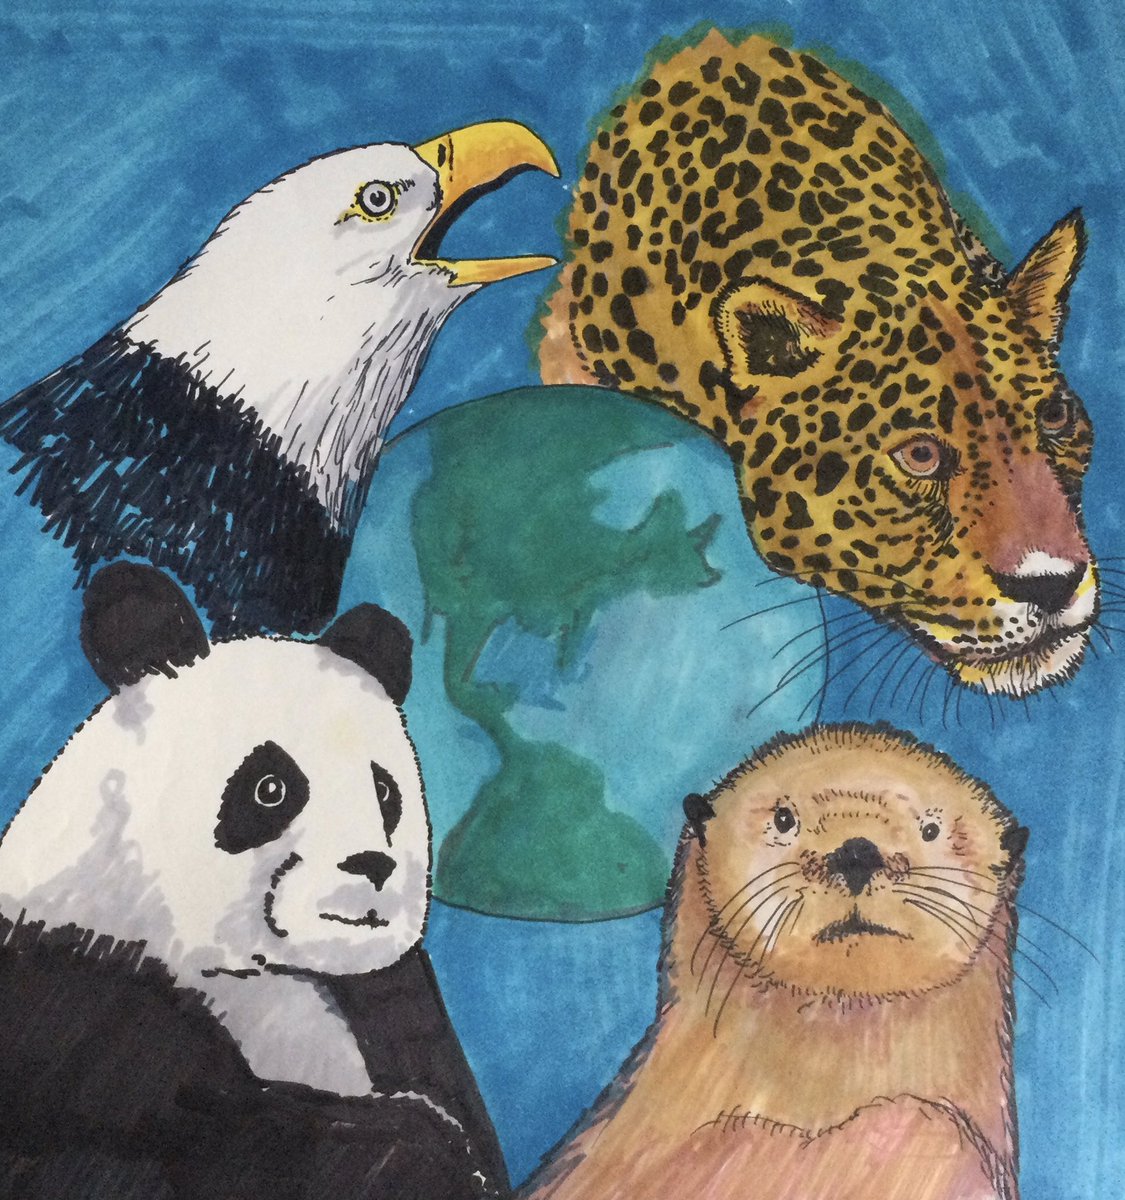 An #EarthDay Collage of animals; A jaguar, Bald Eagle, Panda Bear, and a Sea Otter. All animals of concern on this planet Earth.